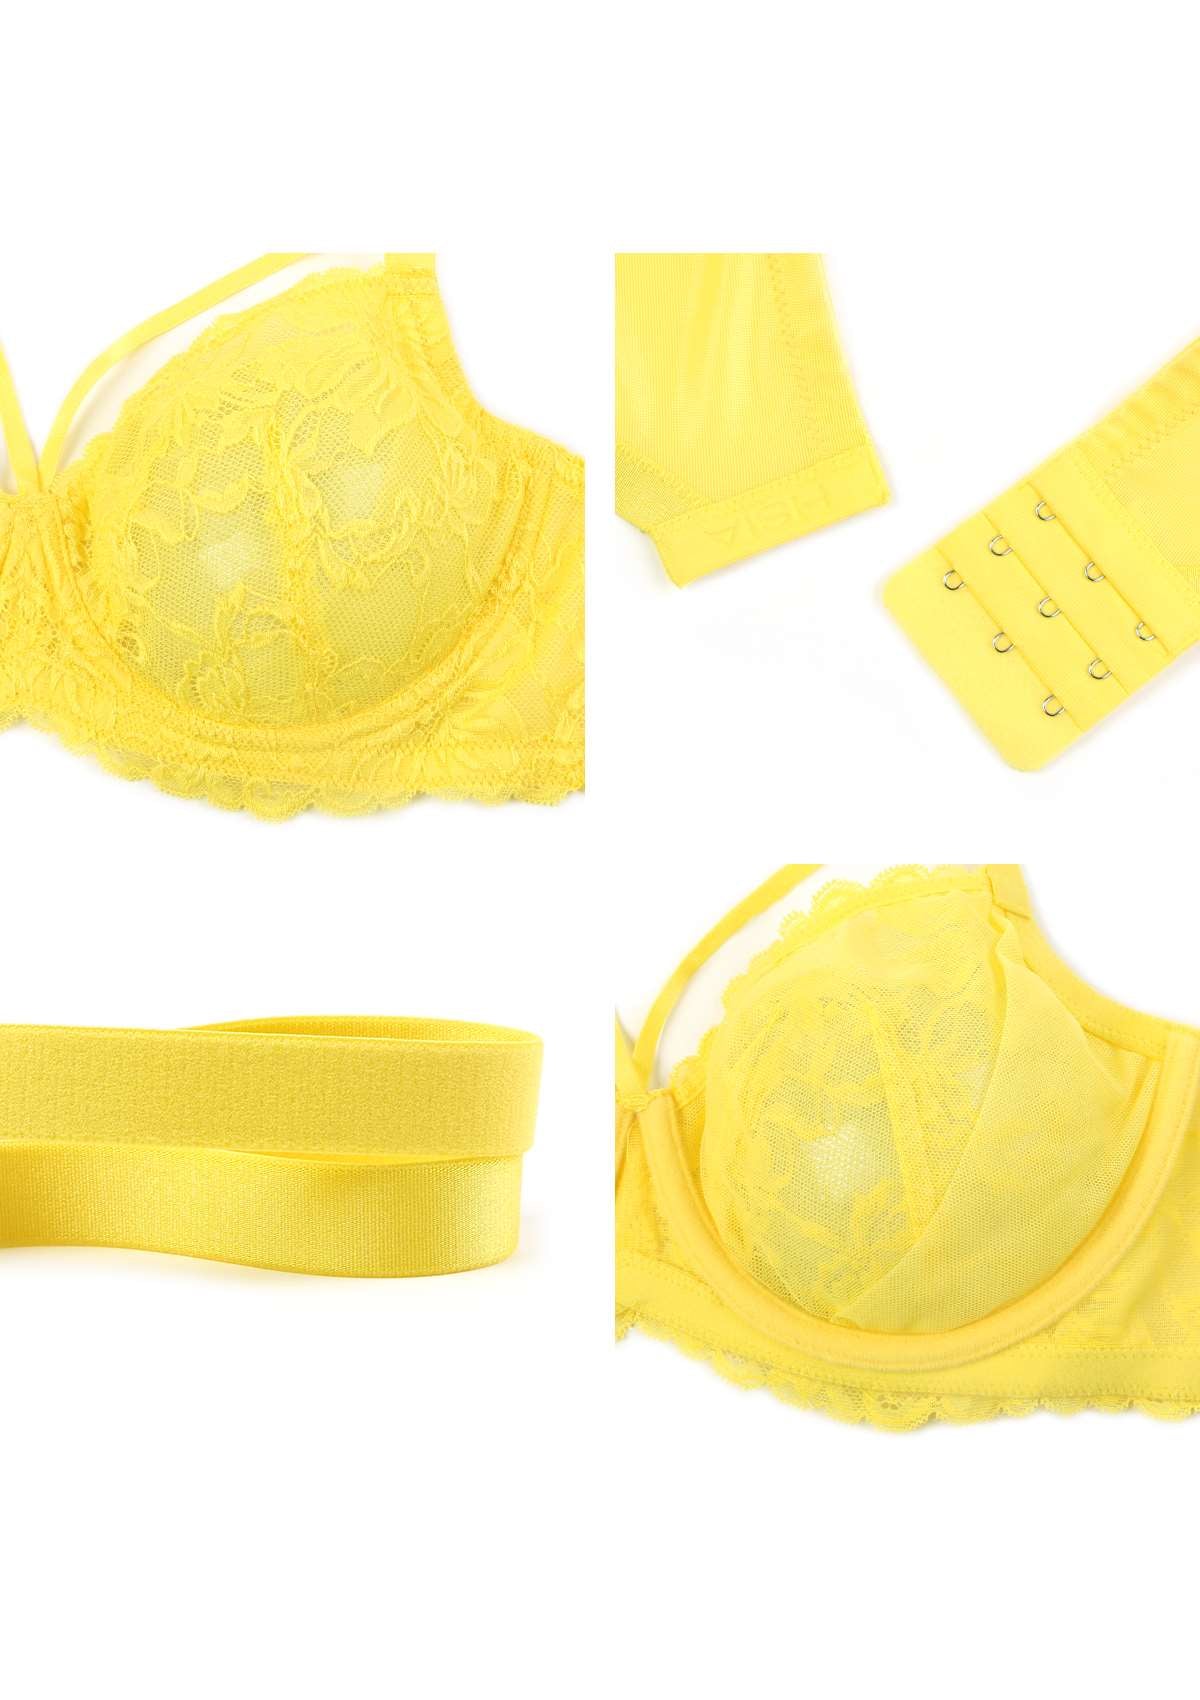 HSIA Unlined Lace Mesh Minimizer Bra For Large Breasts, Full Coverage - Bright Yellow / 34 / D